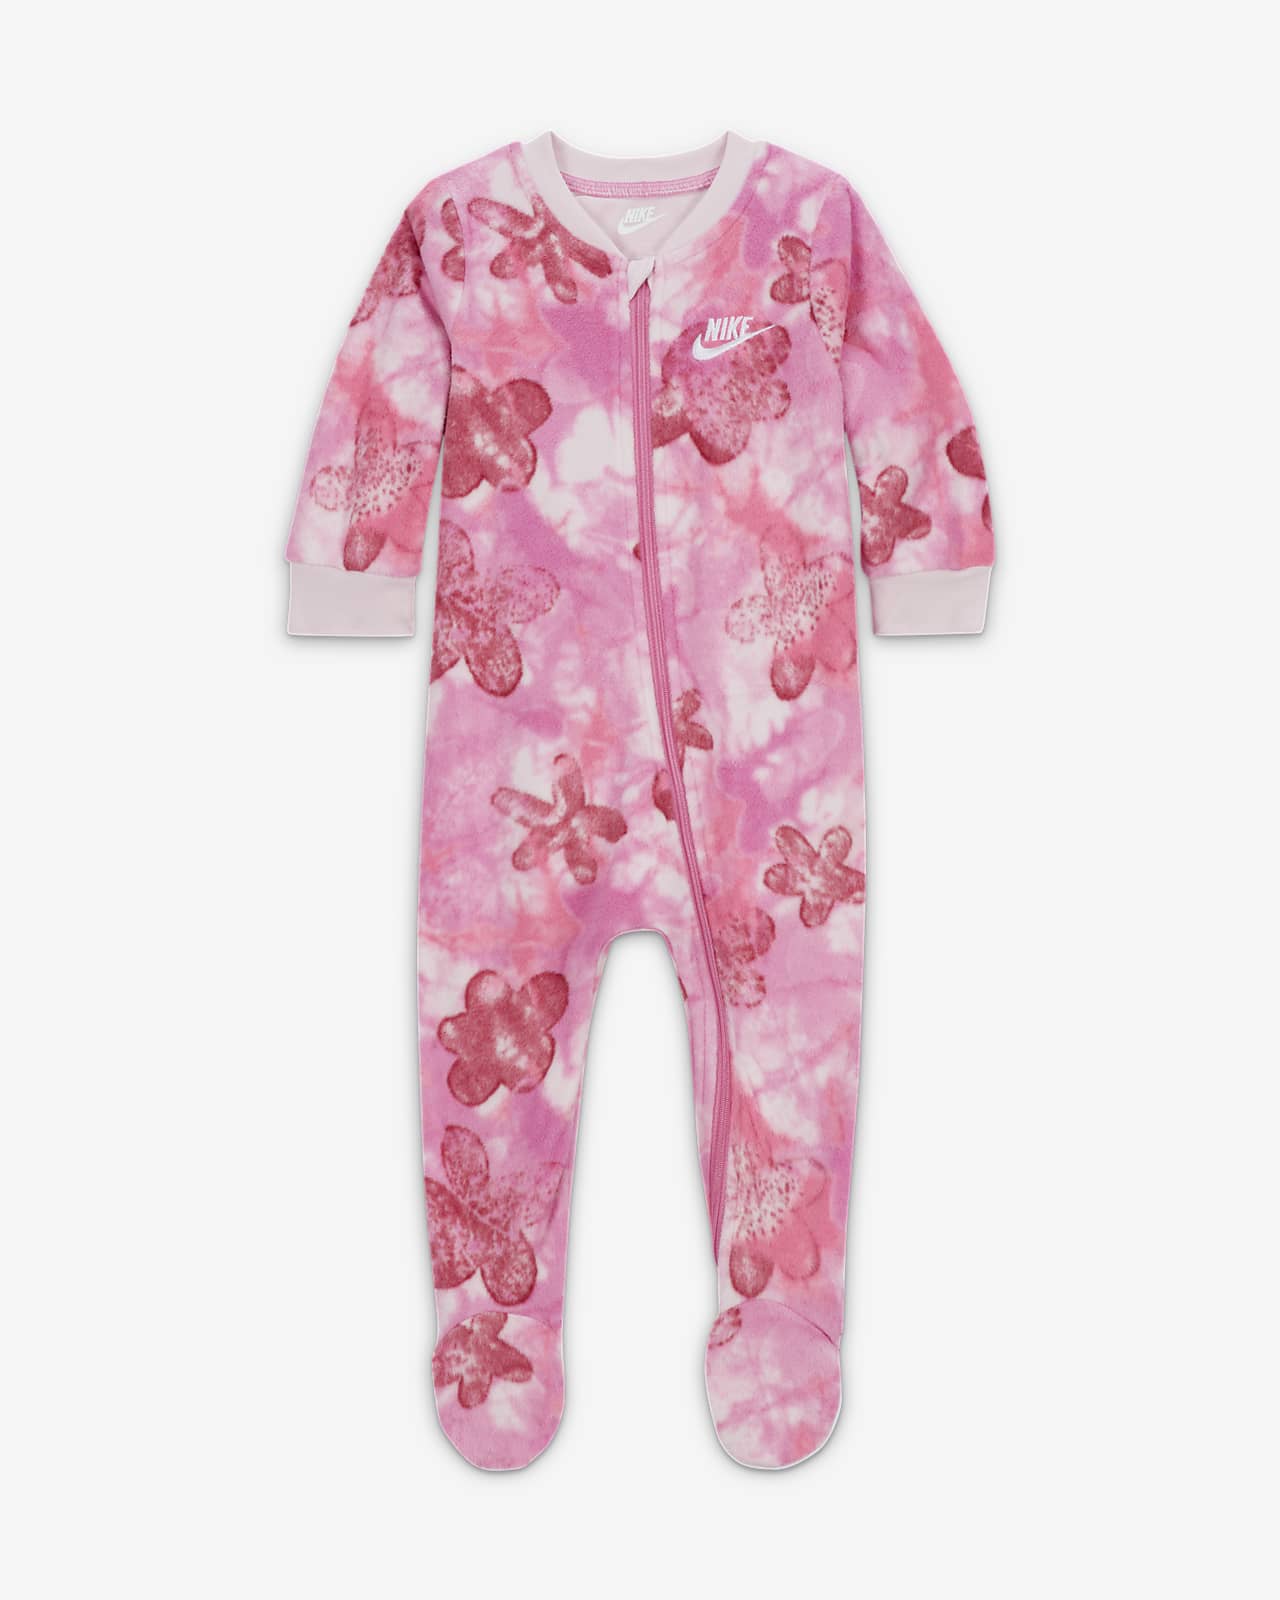 Nike Sci-Dye Club Coverall Baby Coverall